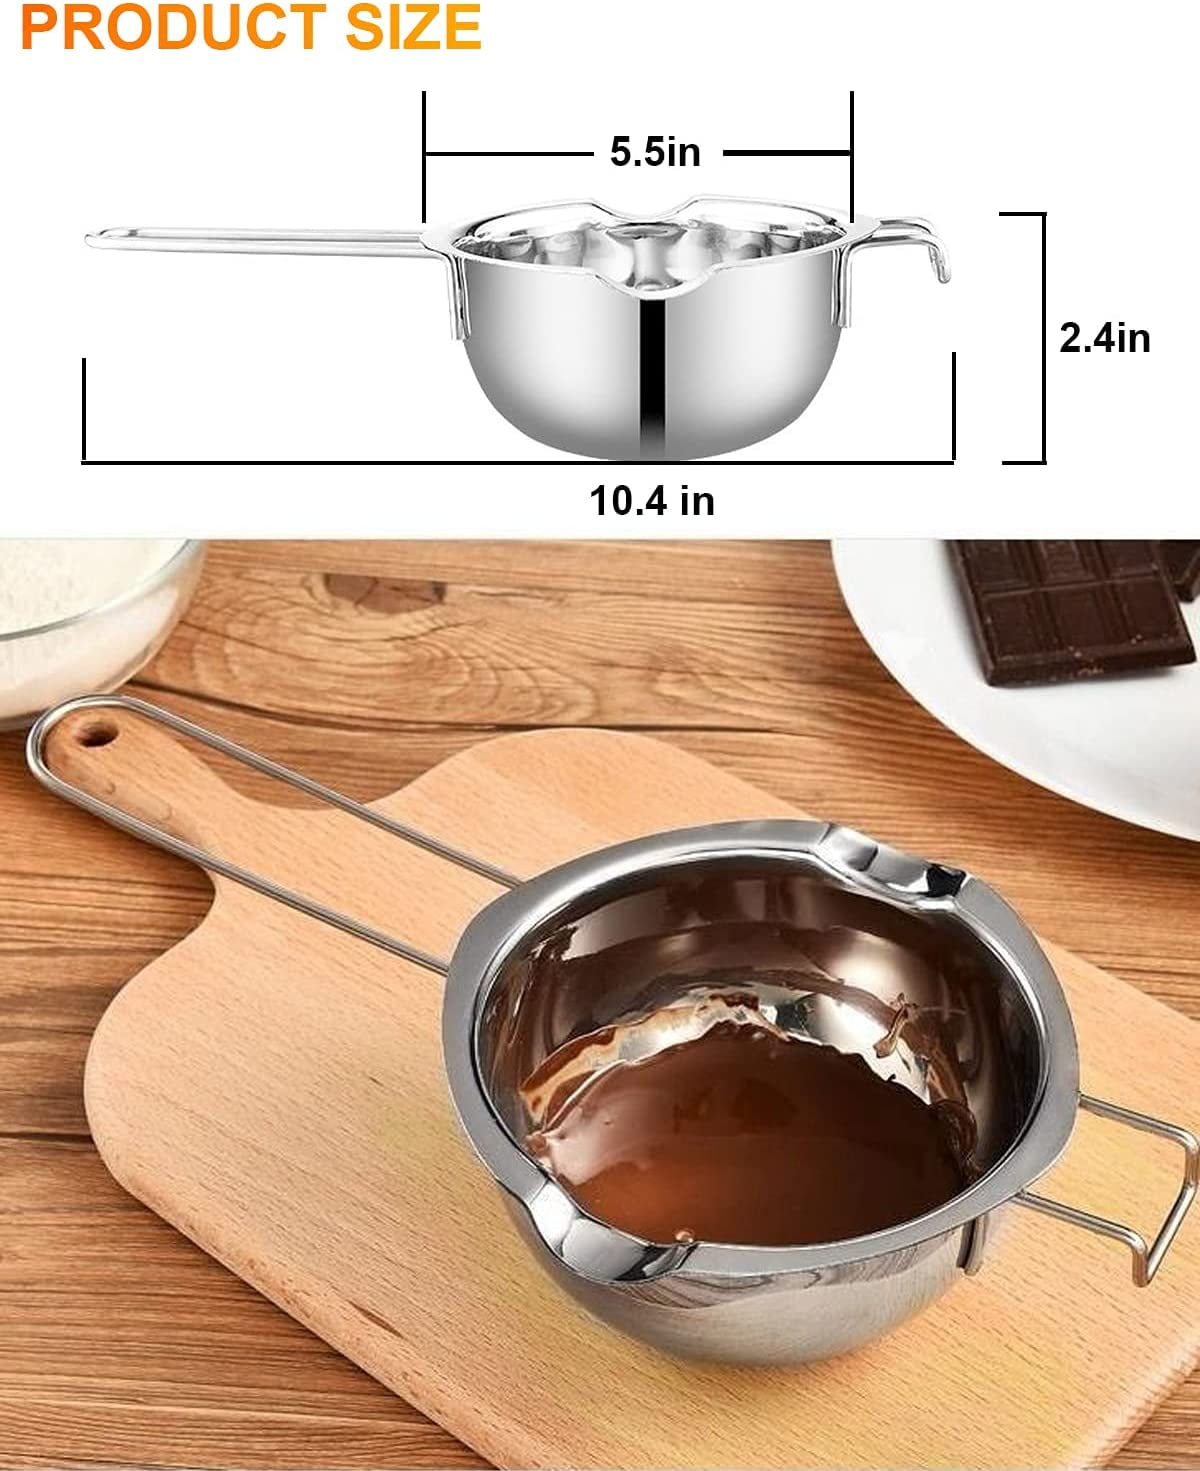  Double Boiler Pot Set, 1200ML Double Boiler, 2800ML Stainless  Steel Pot with Silicone Spatula for Melting Chocolate,Candy, Soap, Wax,  Candle Making : Arts, Crafts & Sewing